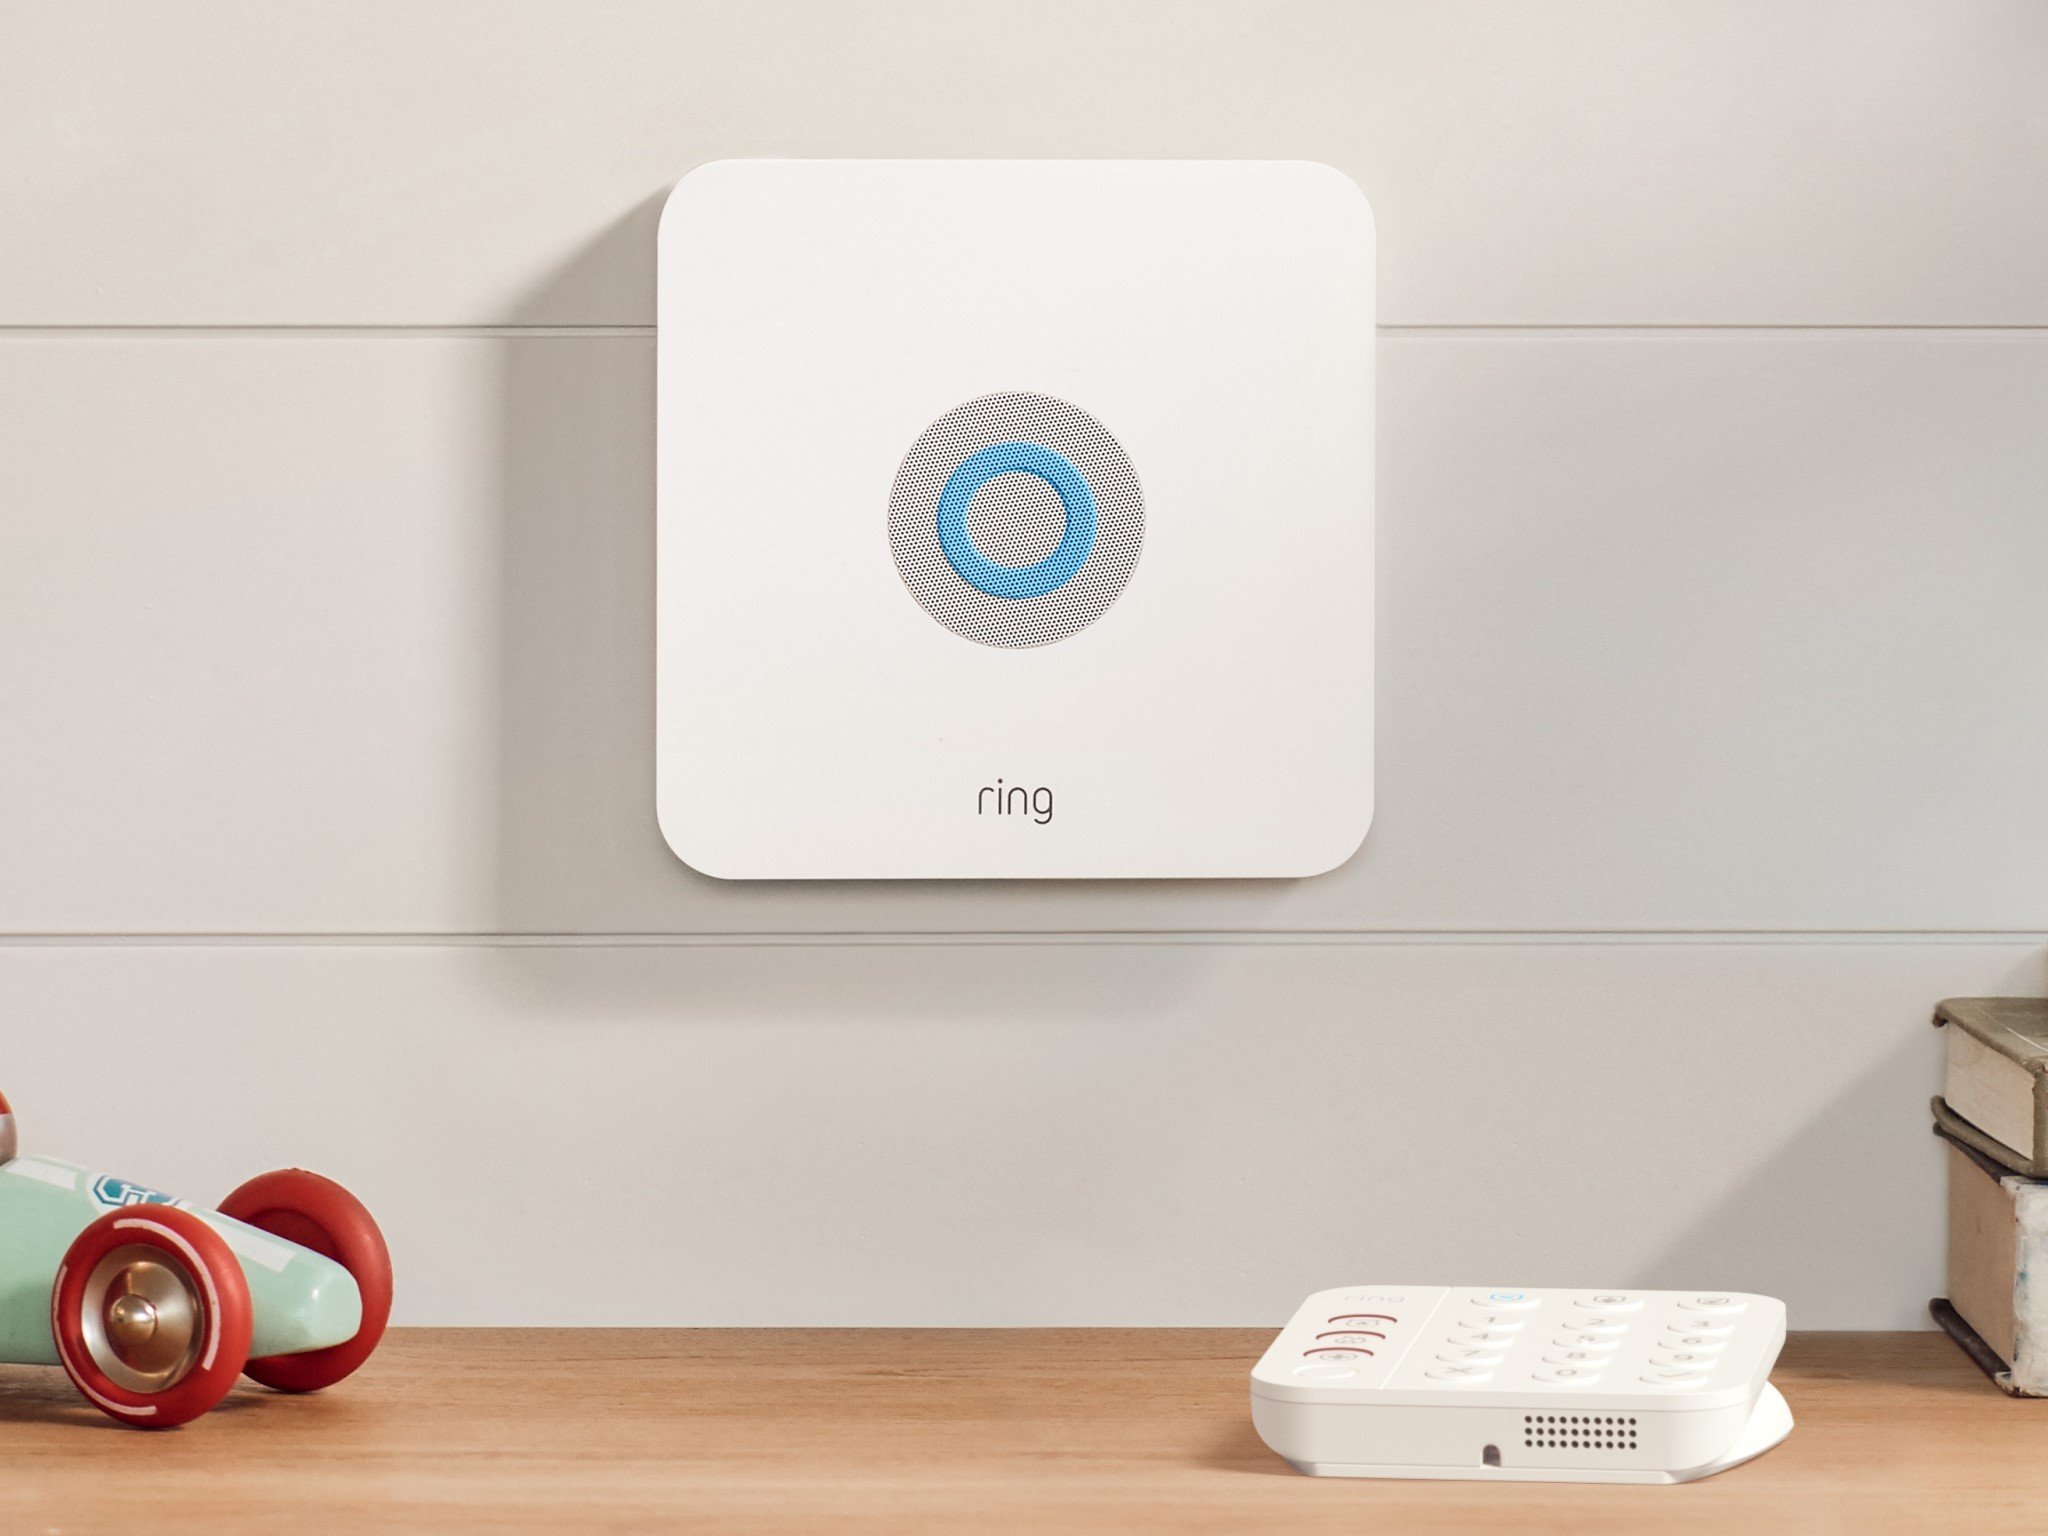 Secondgeneration Ring Alarm system is easier to use and looks way